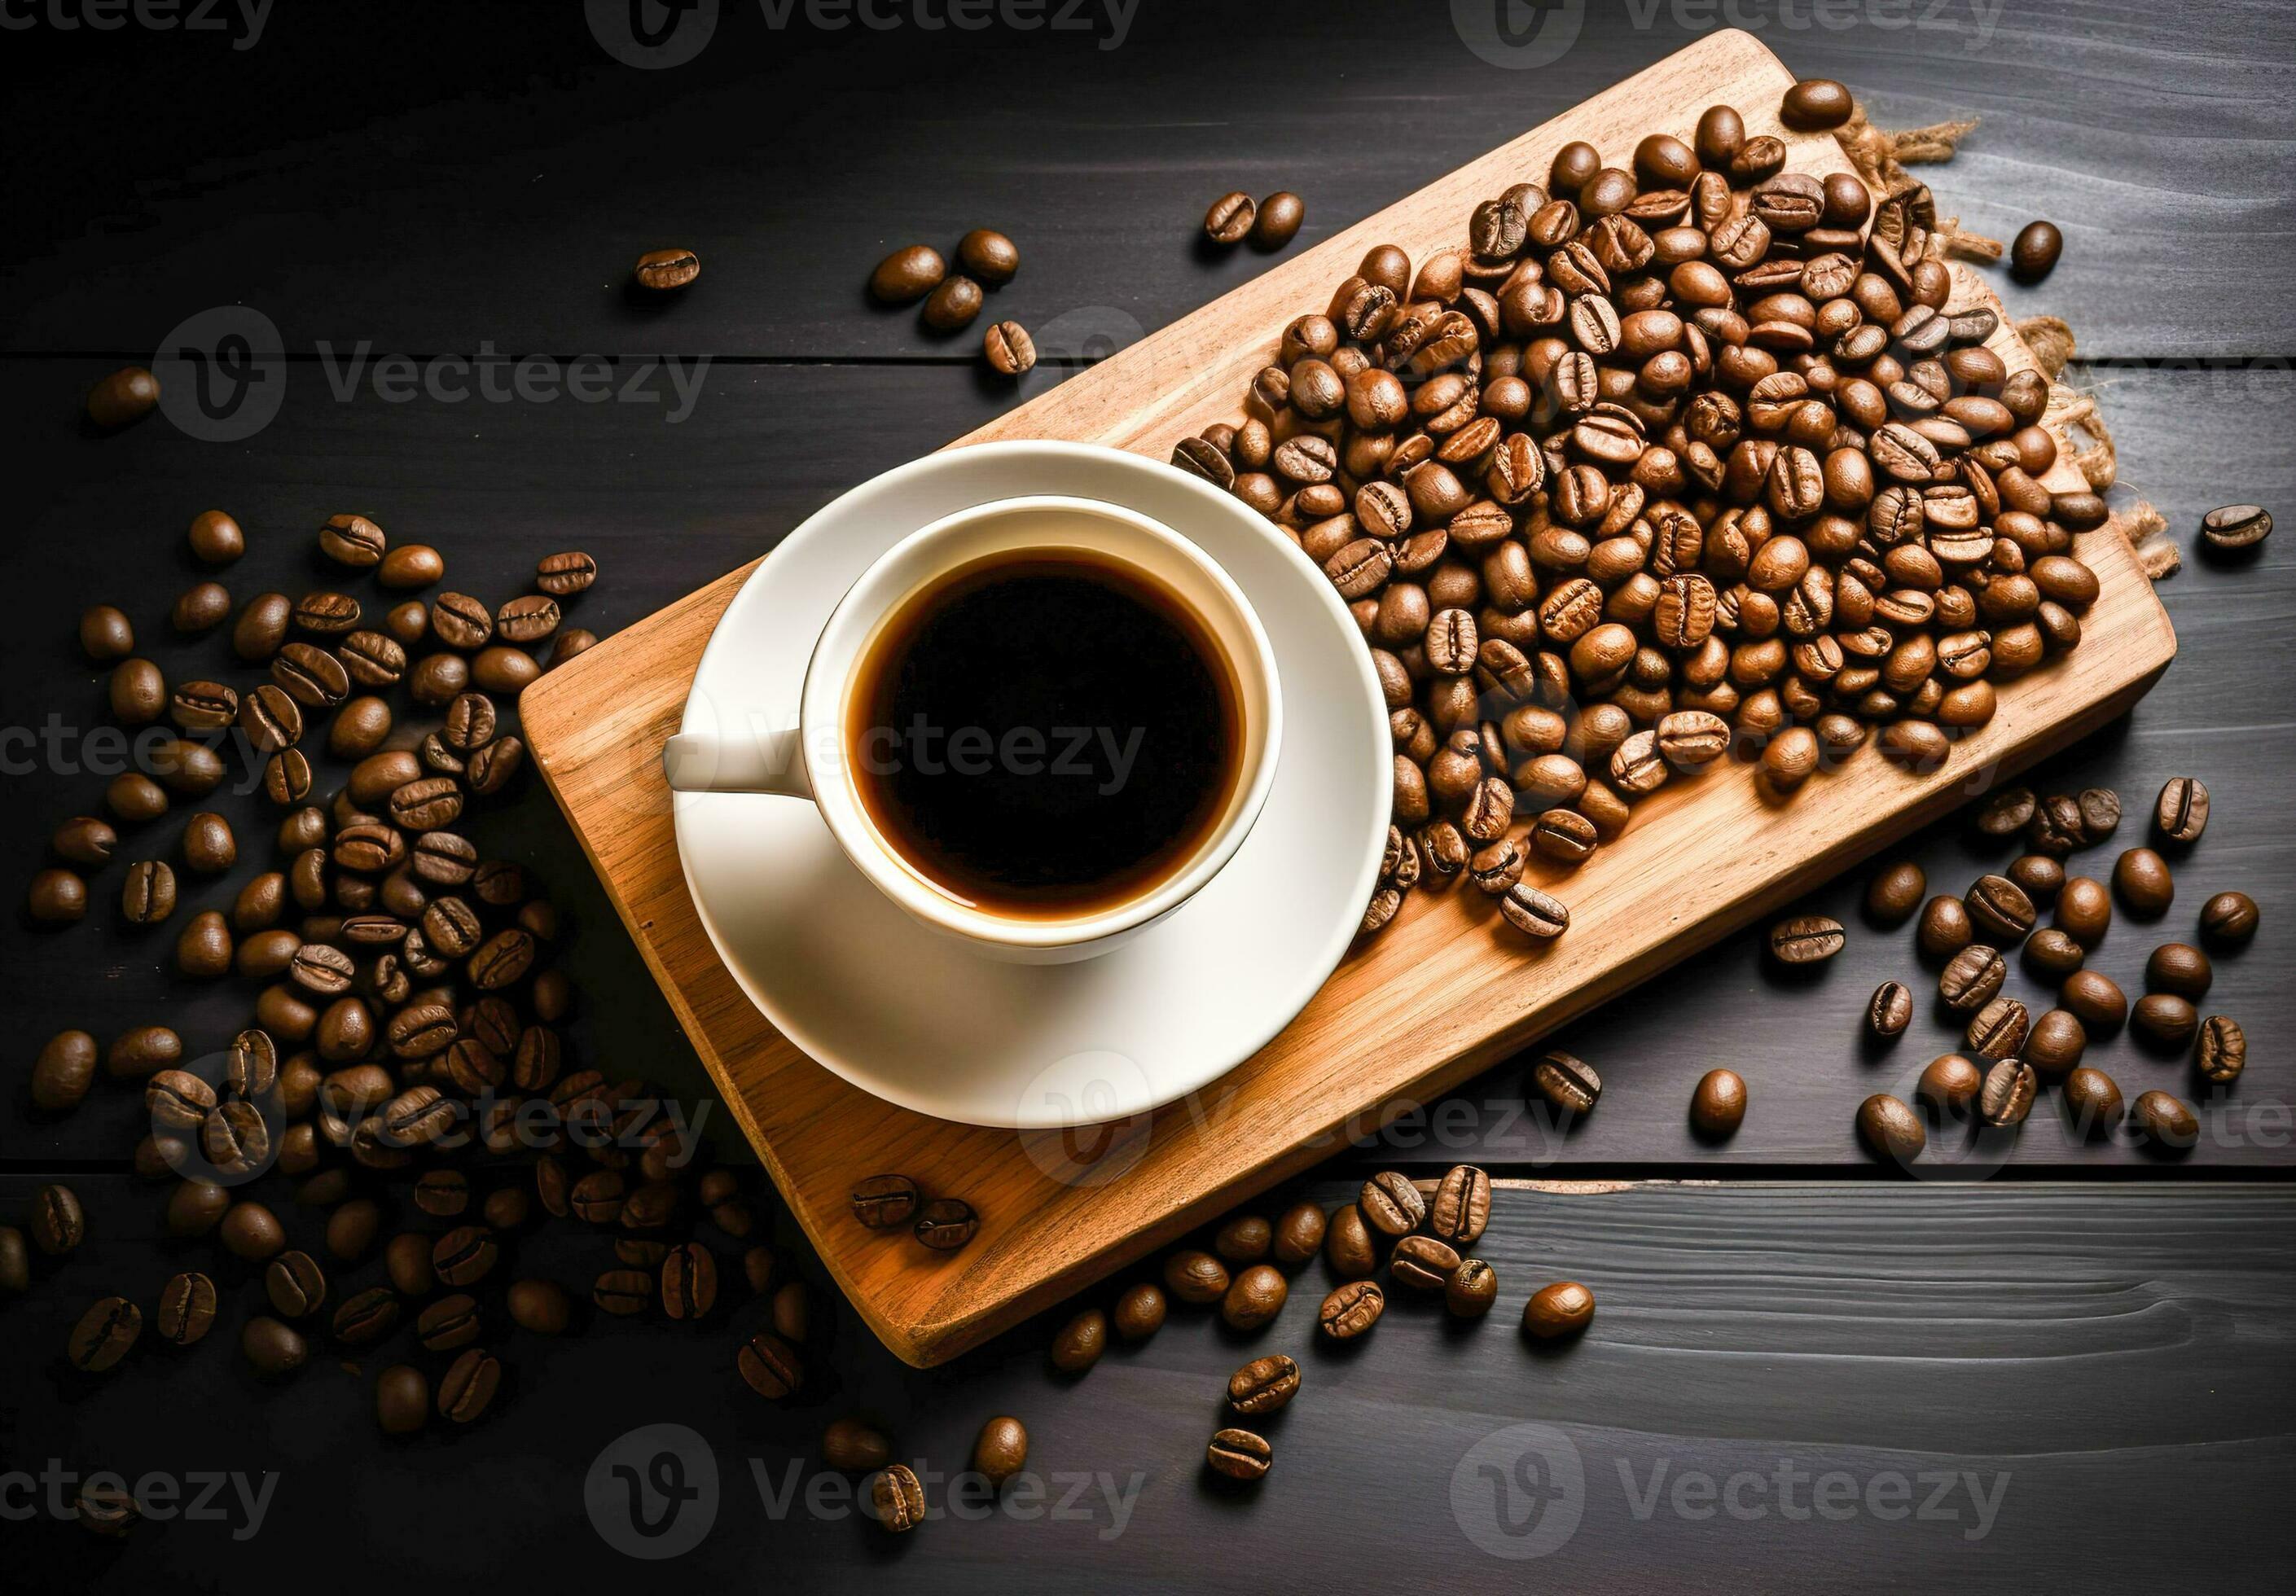 https://static.vecteezy.com/system/resources/previews/023/513/863/large_2x/hot-coffee-cup-with-coffee-beans-wallpaper-coffee-photo.jpg